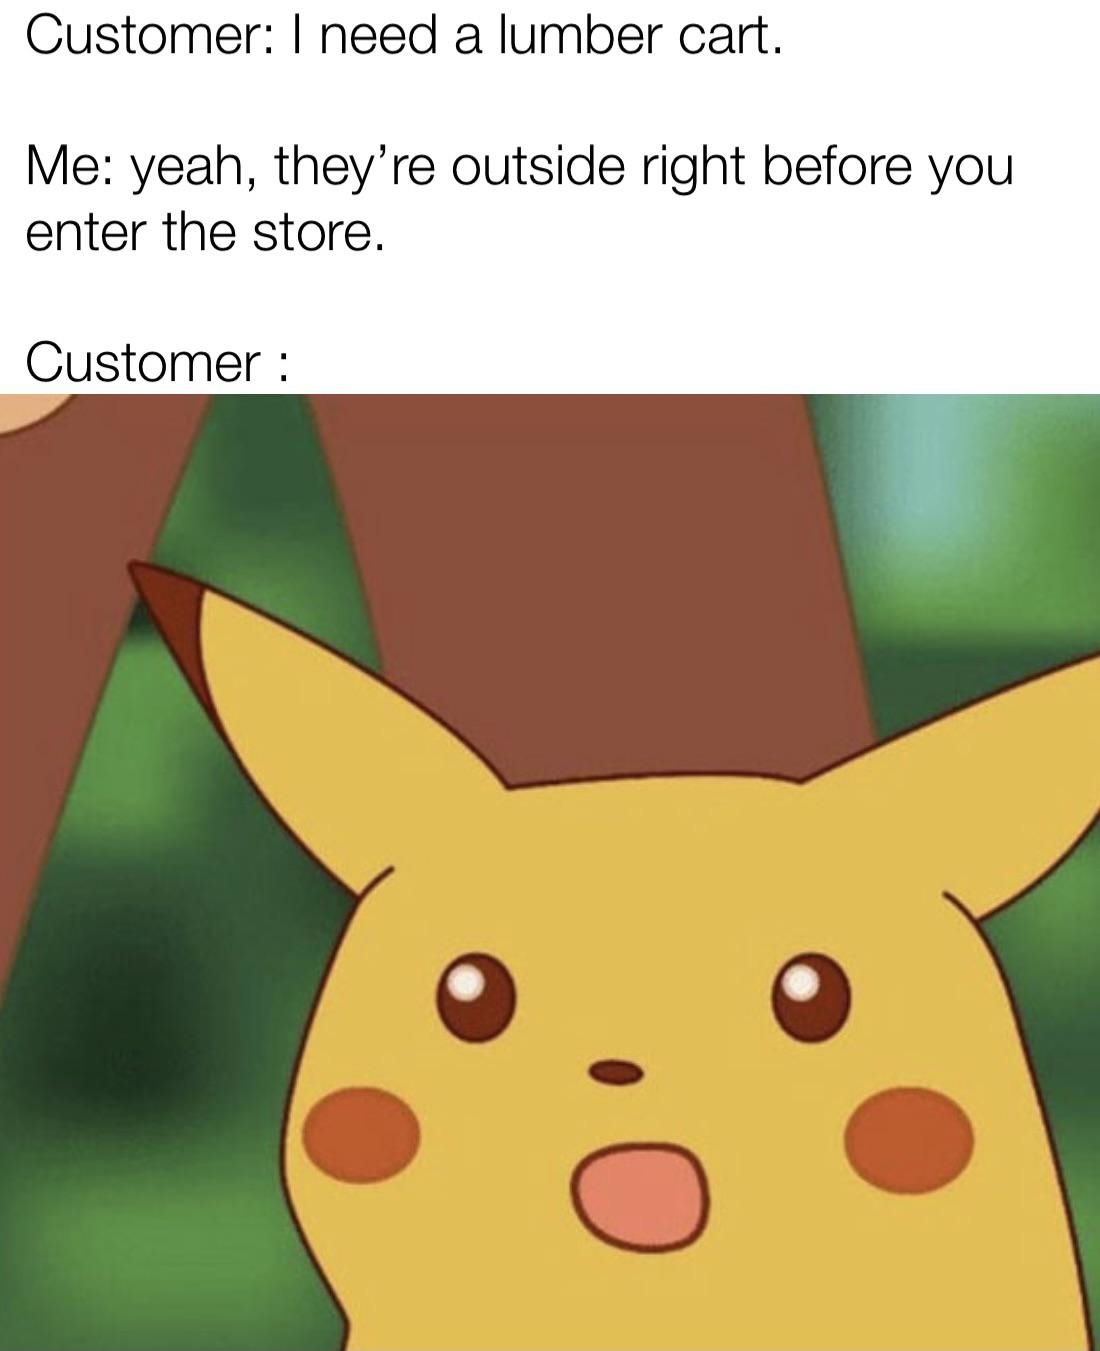 Meme featuring Pikachu. Text reads: &quot;Customer: I need a lumber cart. Me: Yeah, they&#x27;re outside right before you enter the store. Customer: [surprised Pikachu face].&quot;